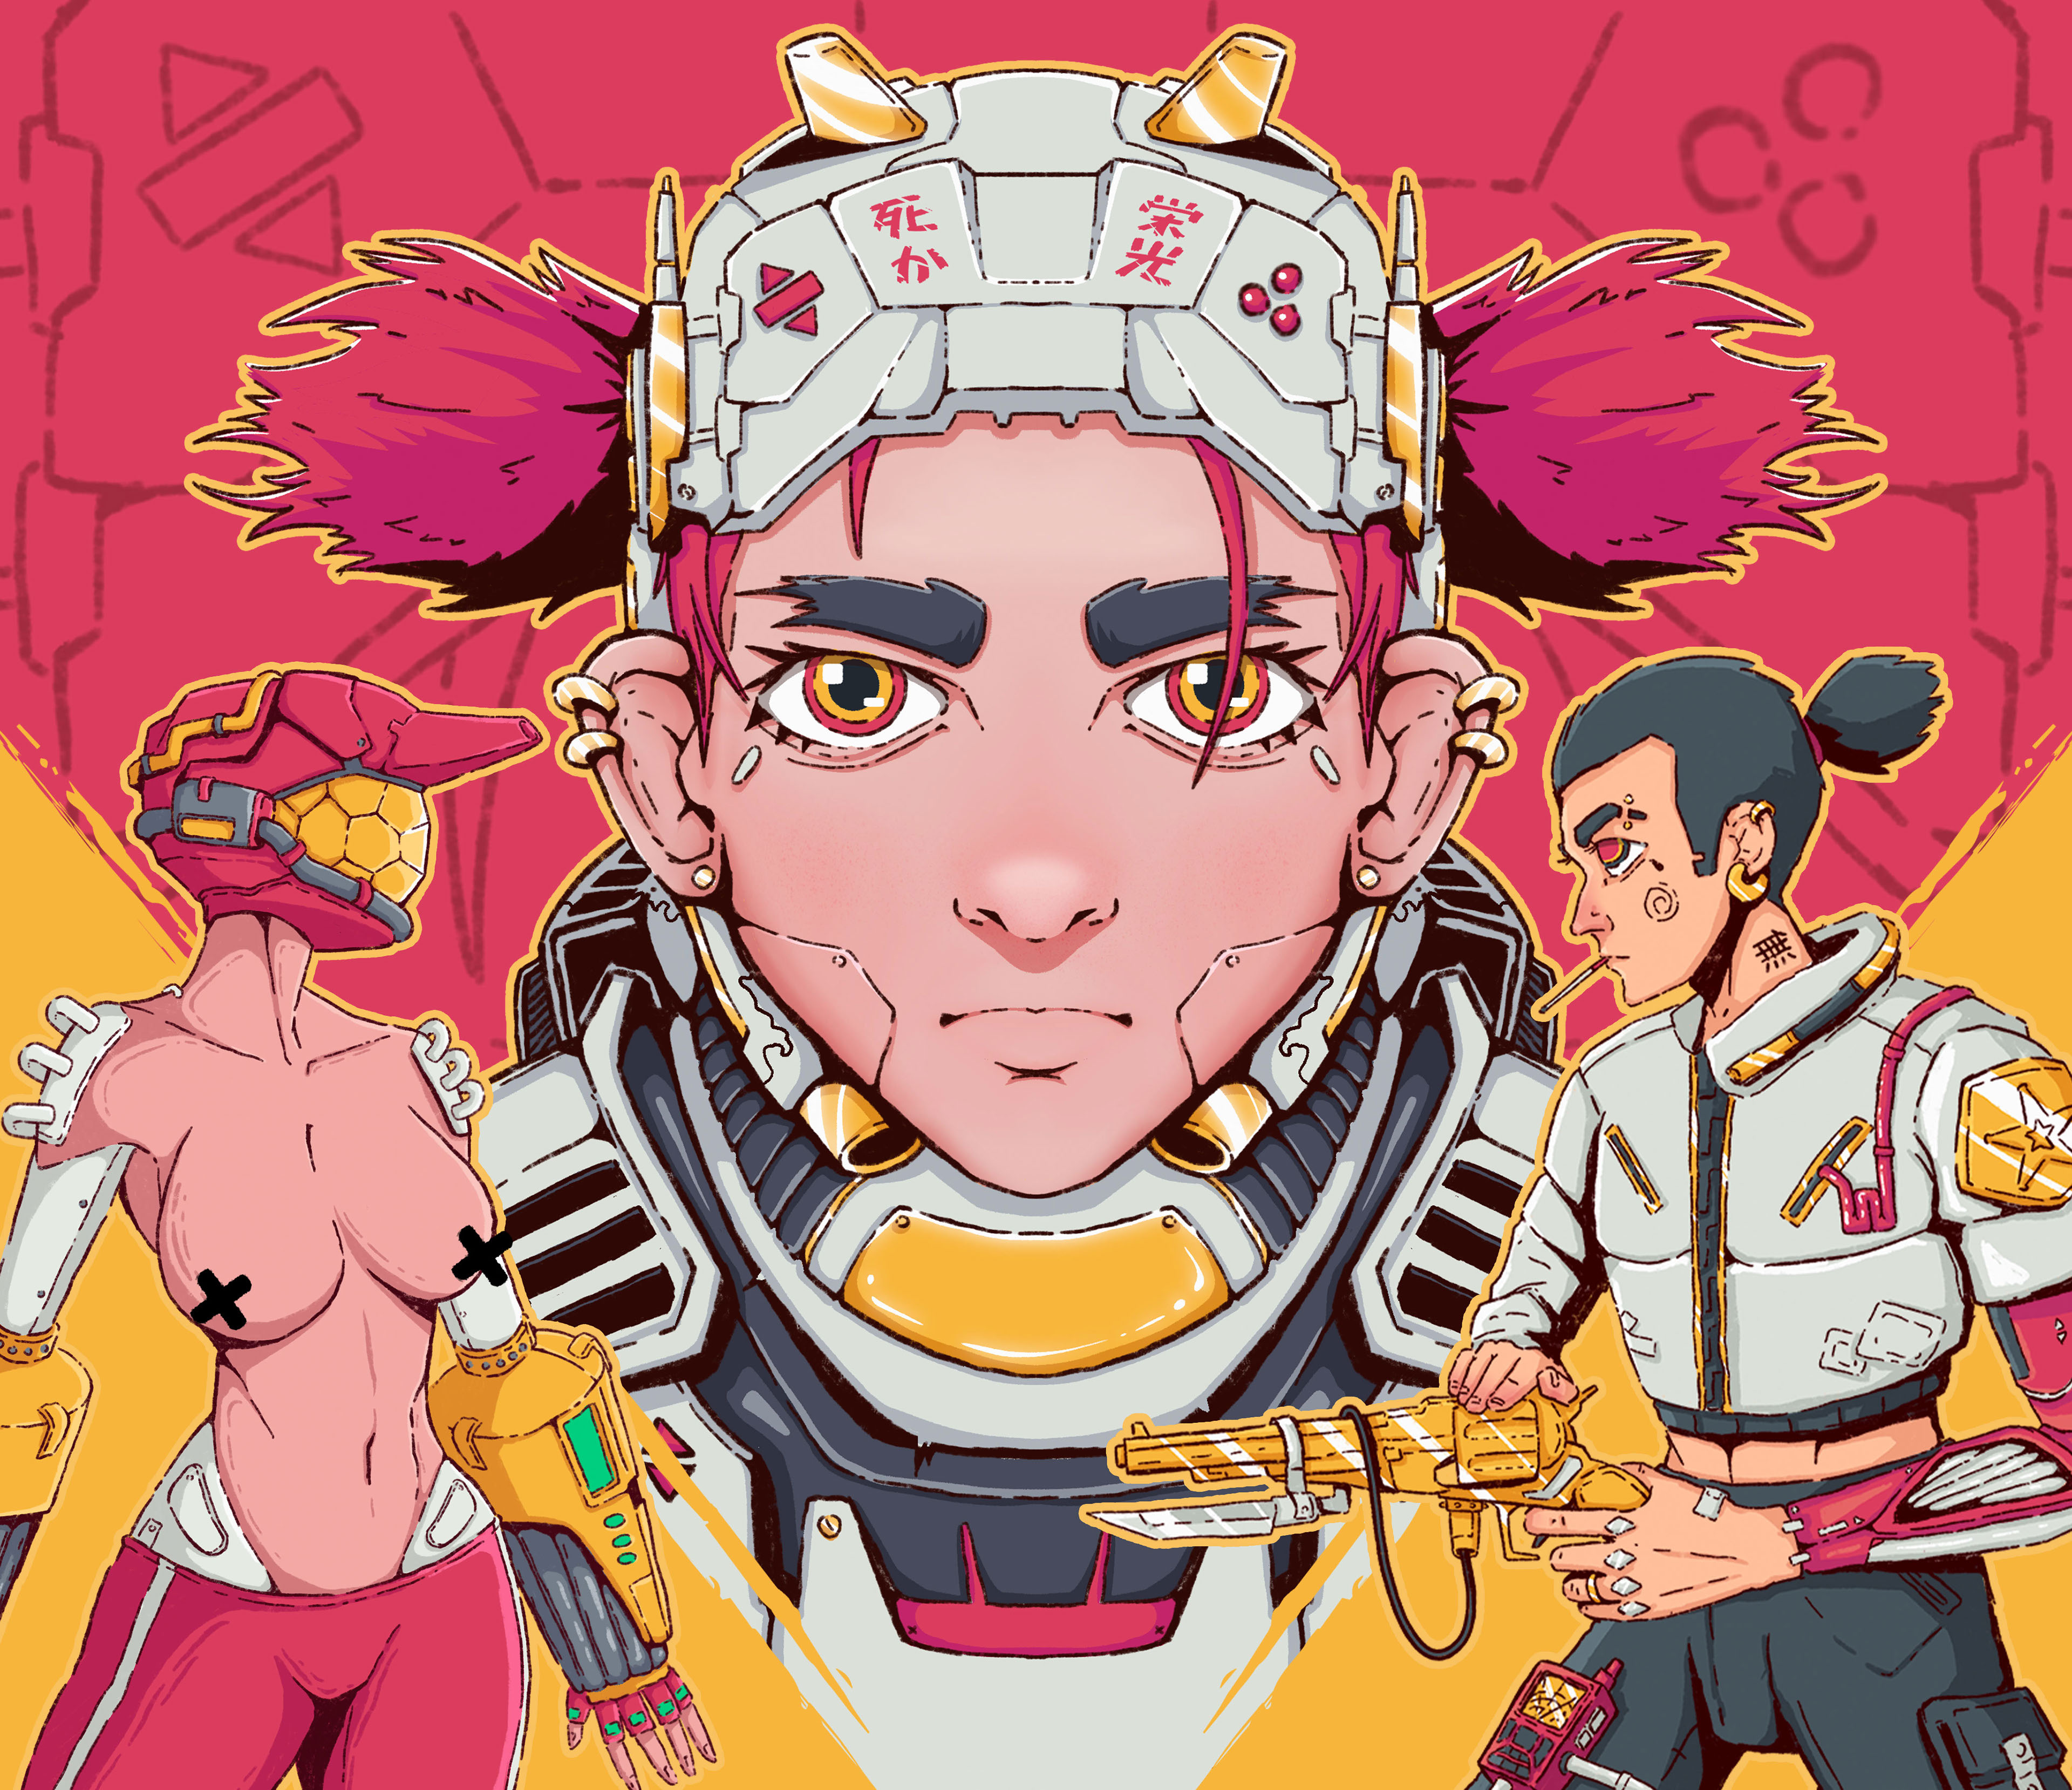 N.T.P.D (Neo Tokyo Police Department) on Behance